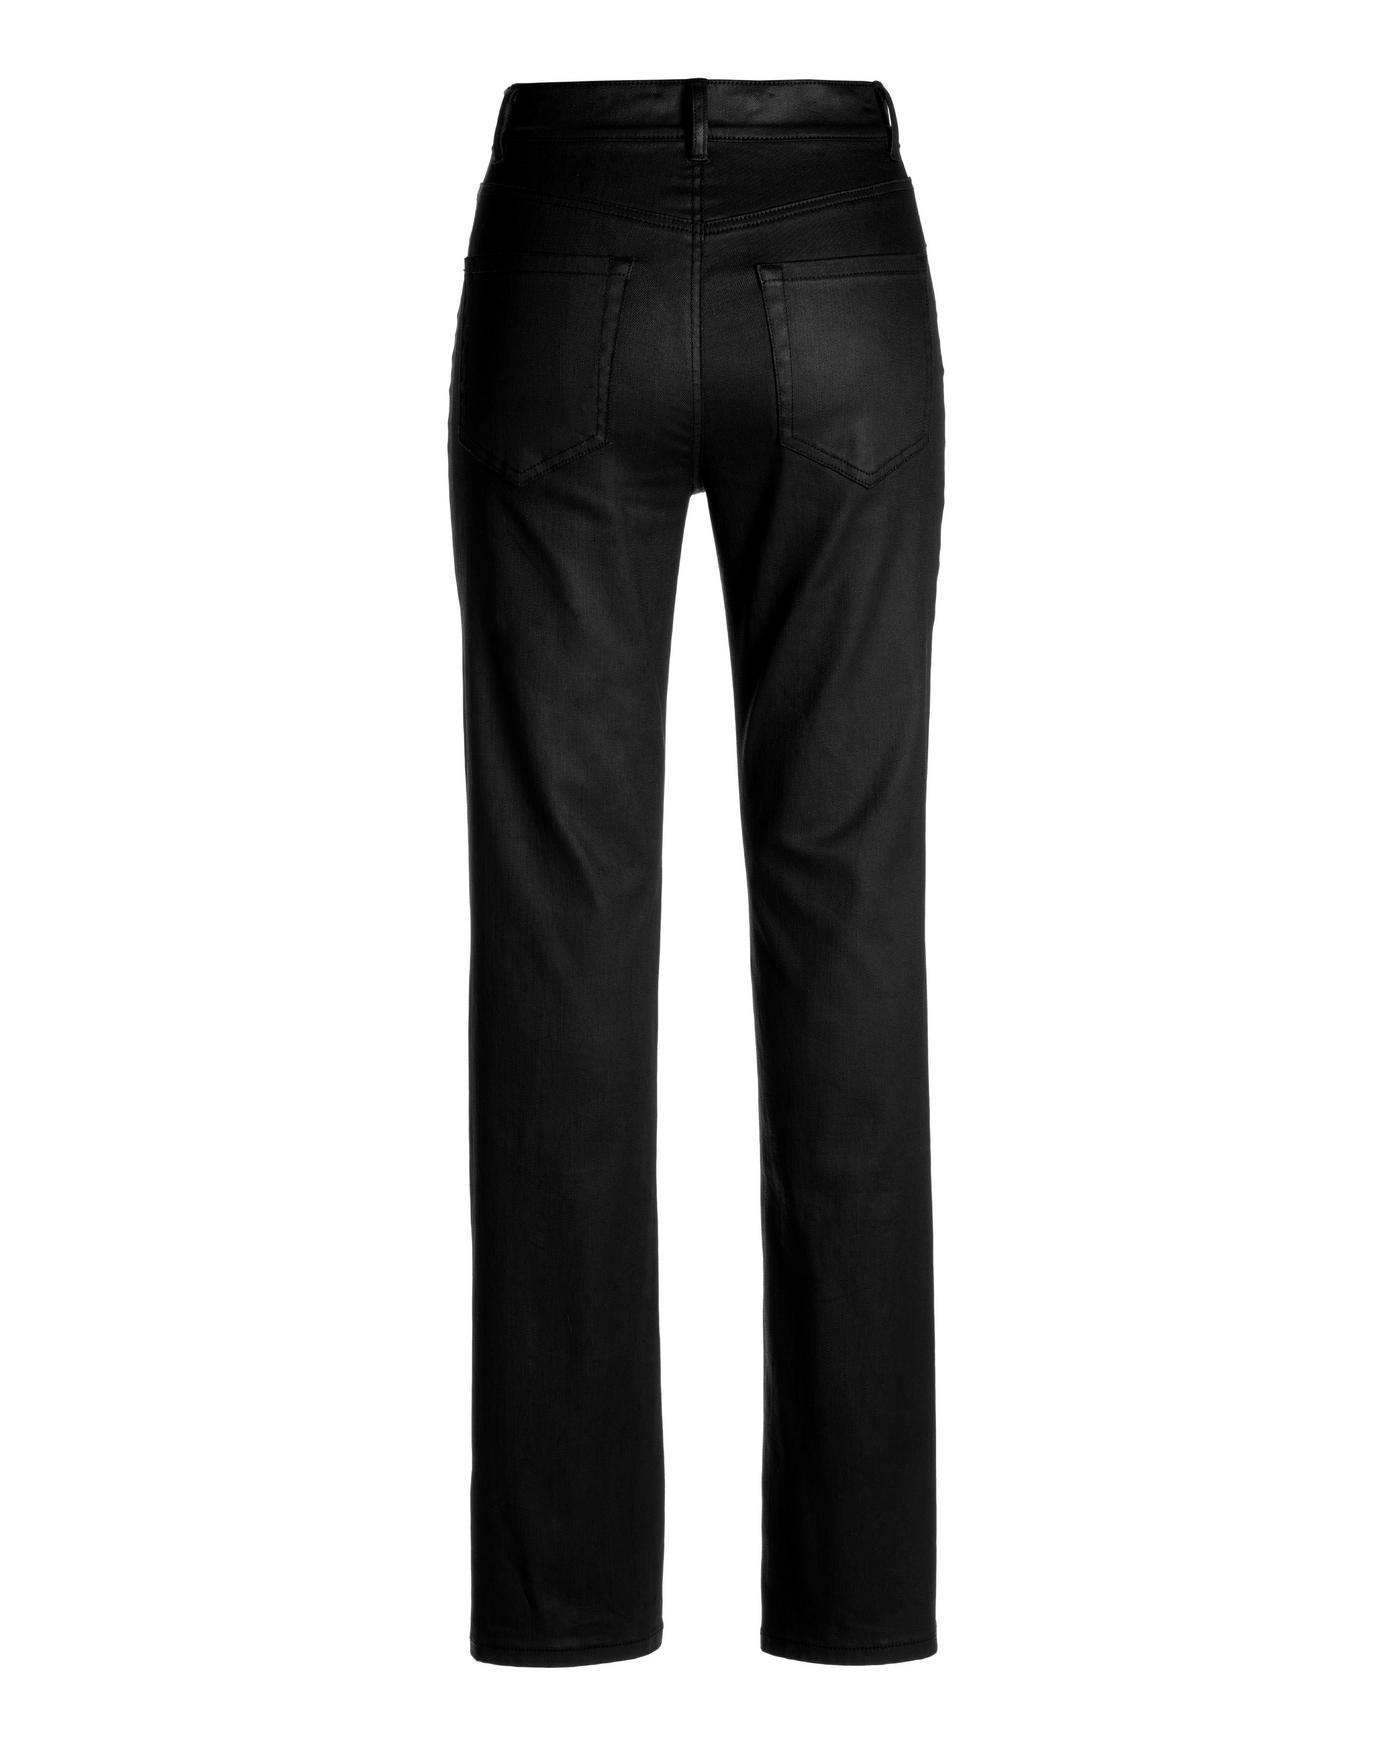 ana Womens Pants Size 12 Black High Rise Straight Button Fly Chino Bottoms